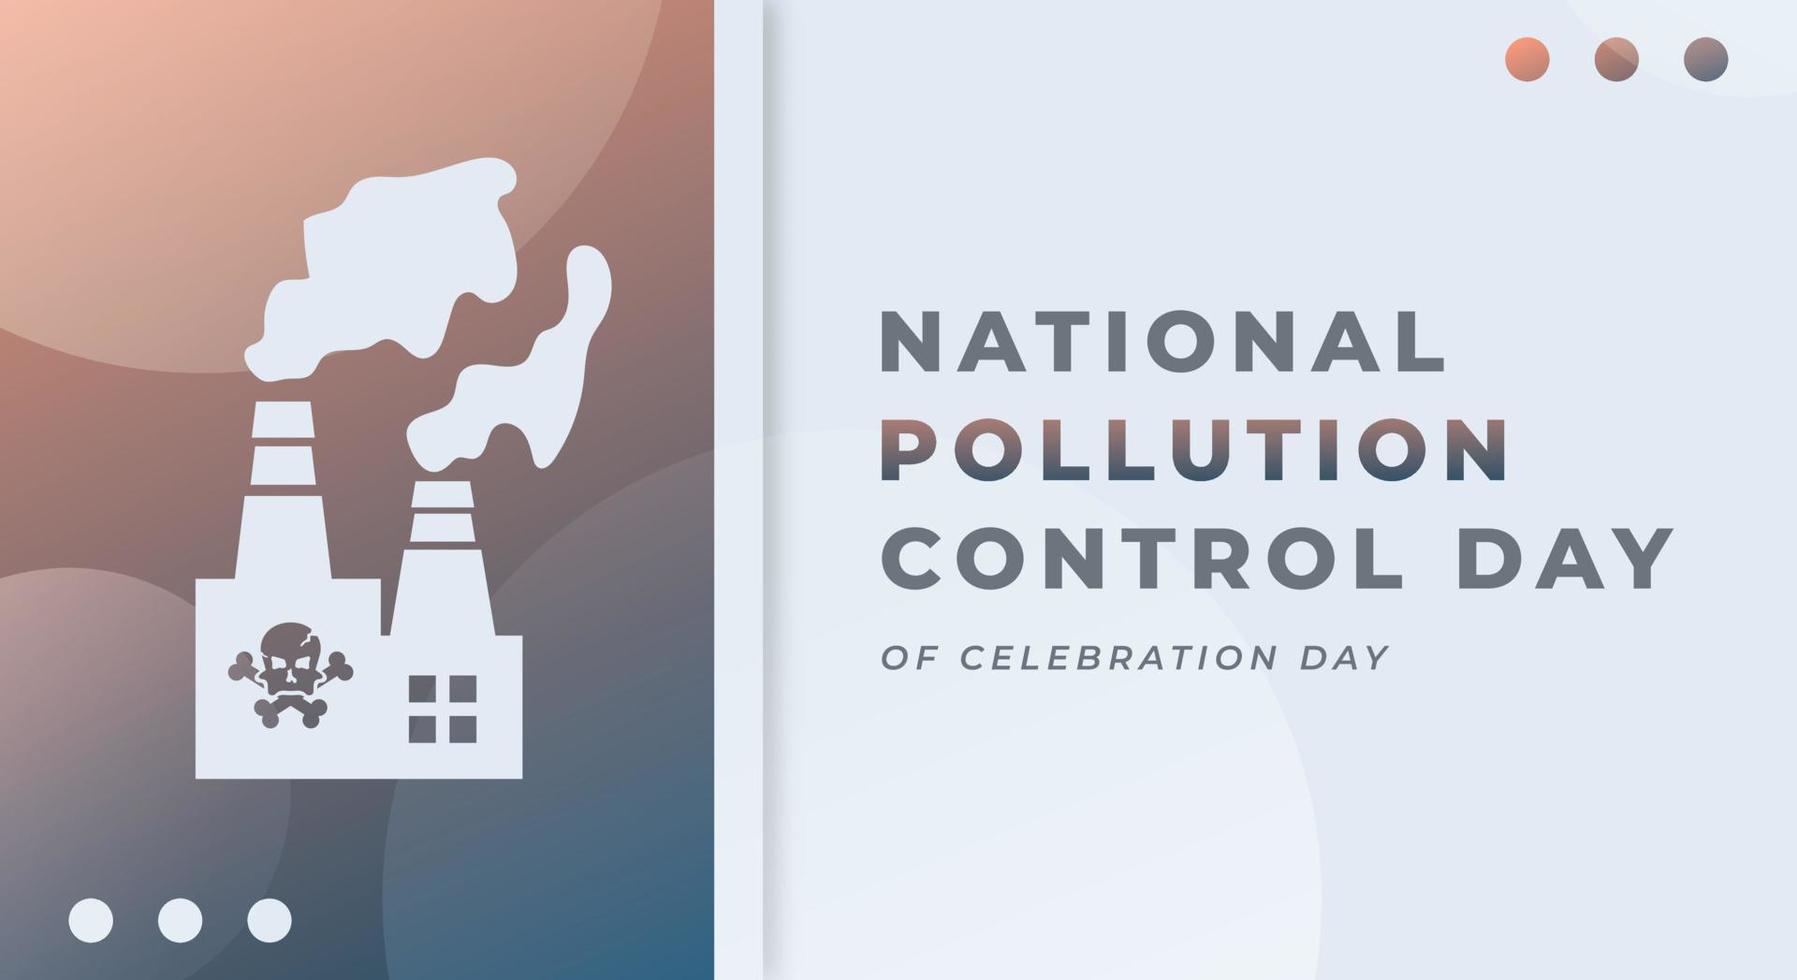 Happy National Pollution Control Day Celebration Vector Design Illustration for Background, Poster, Banner, Advertising, Greeting Card